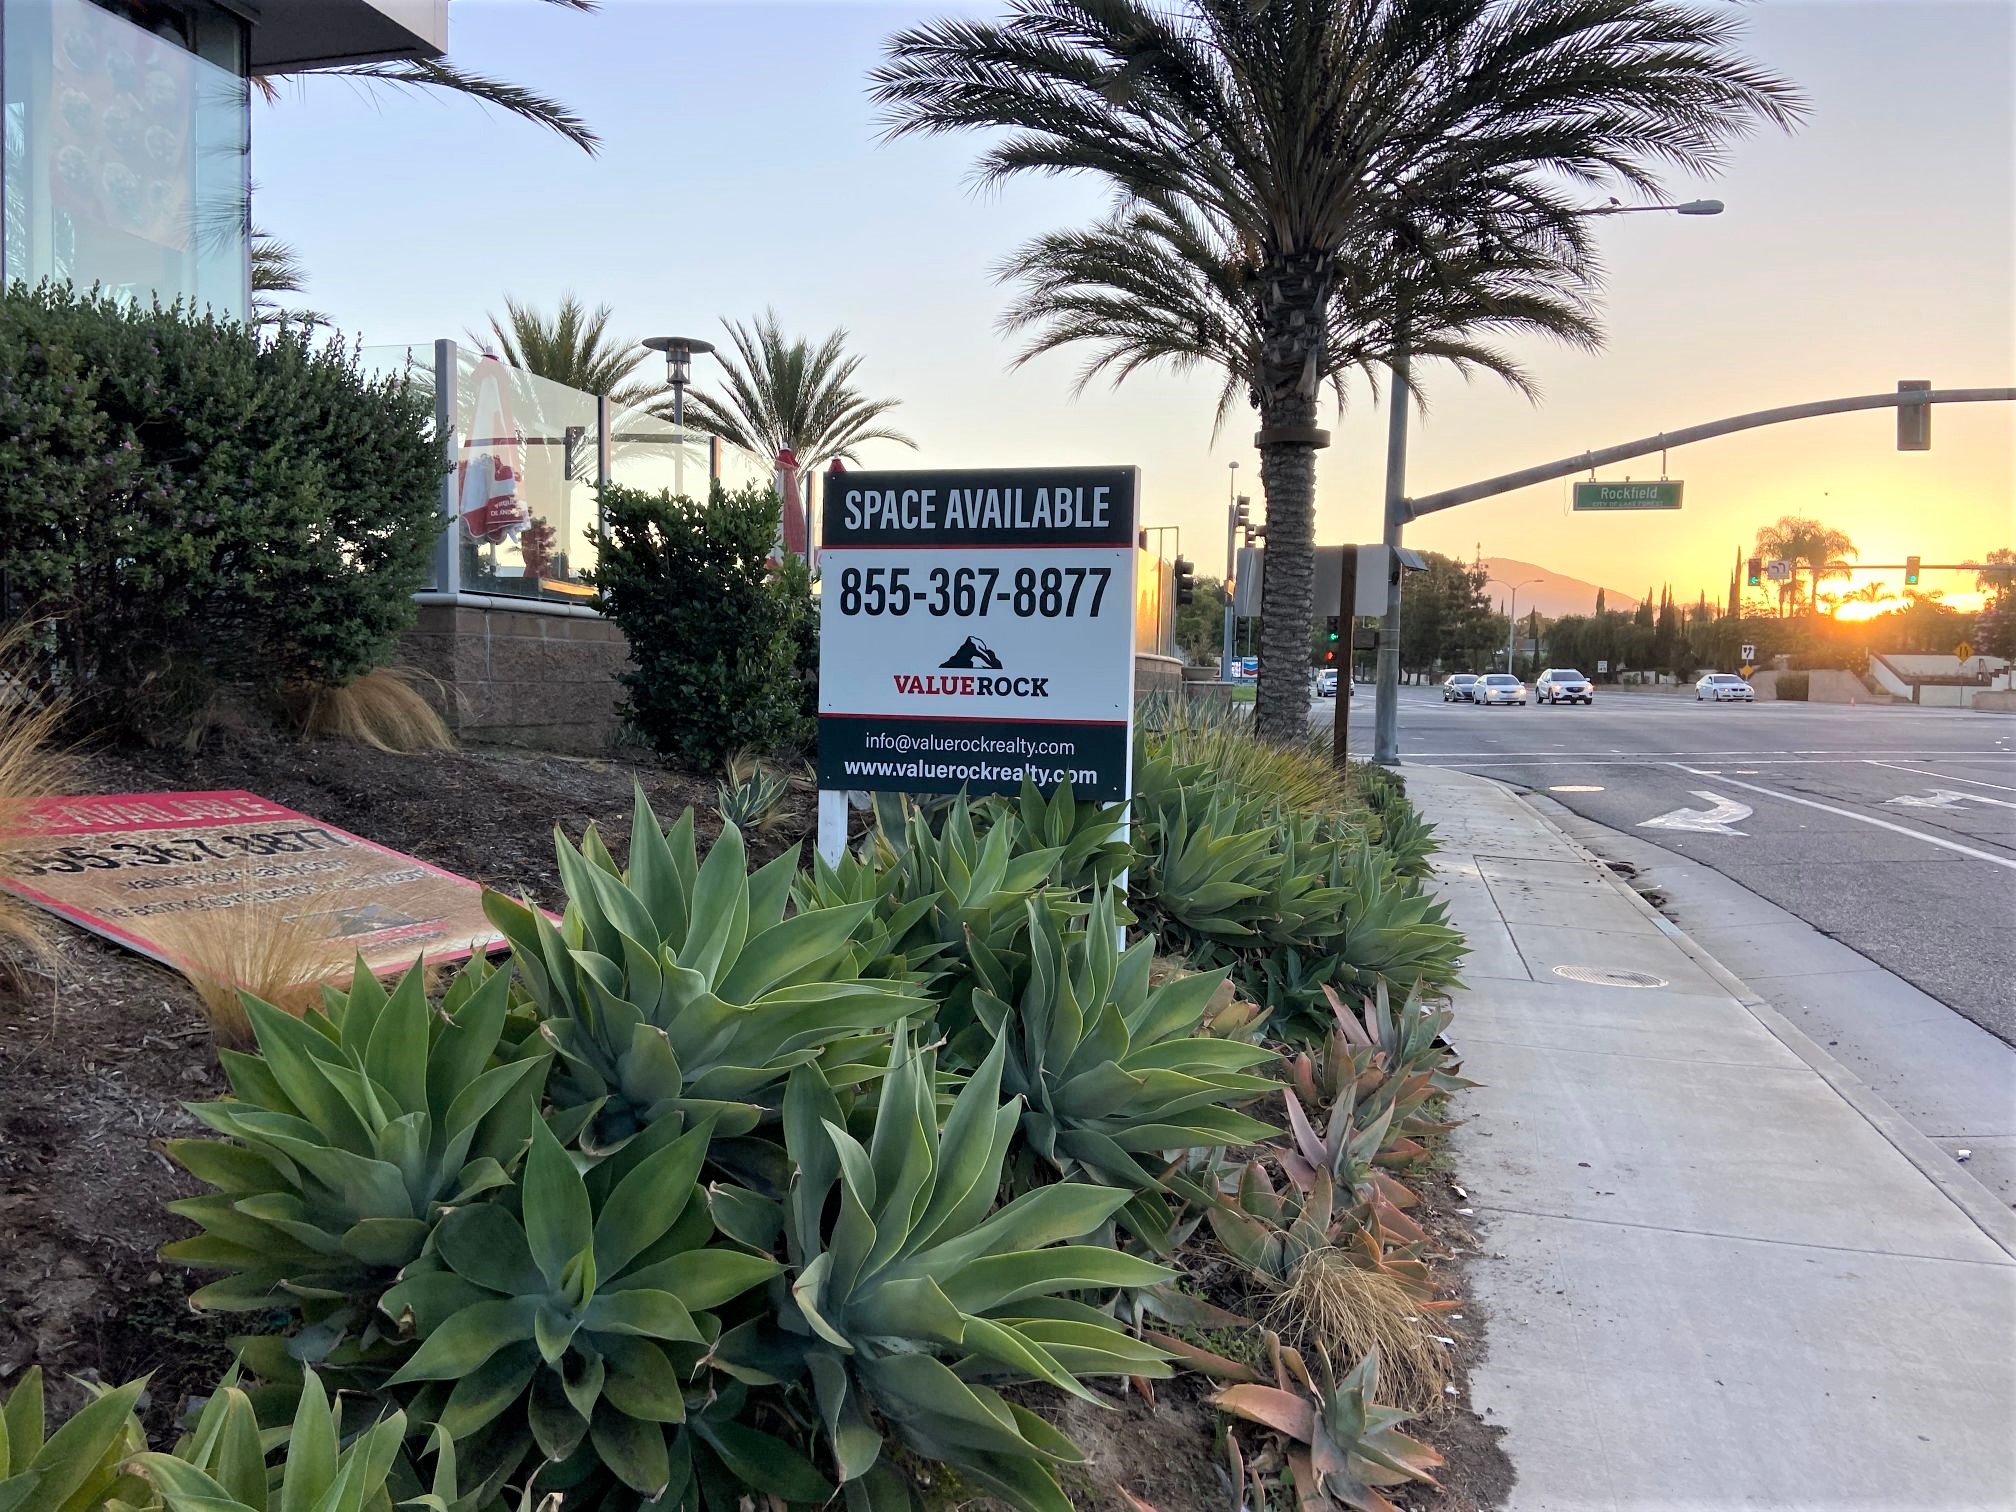 Anti-Graffiti Commercial ‘For Lease’ Signs in Orange County CA